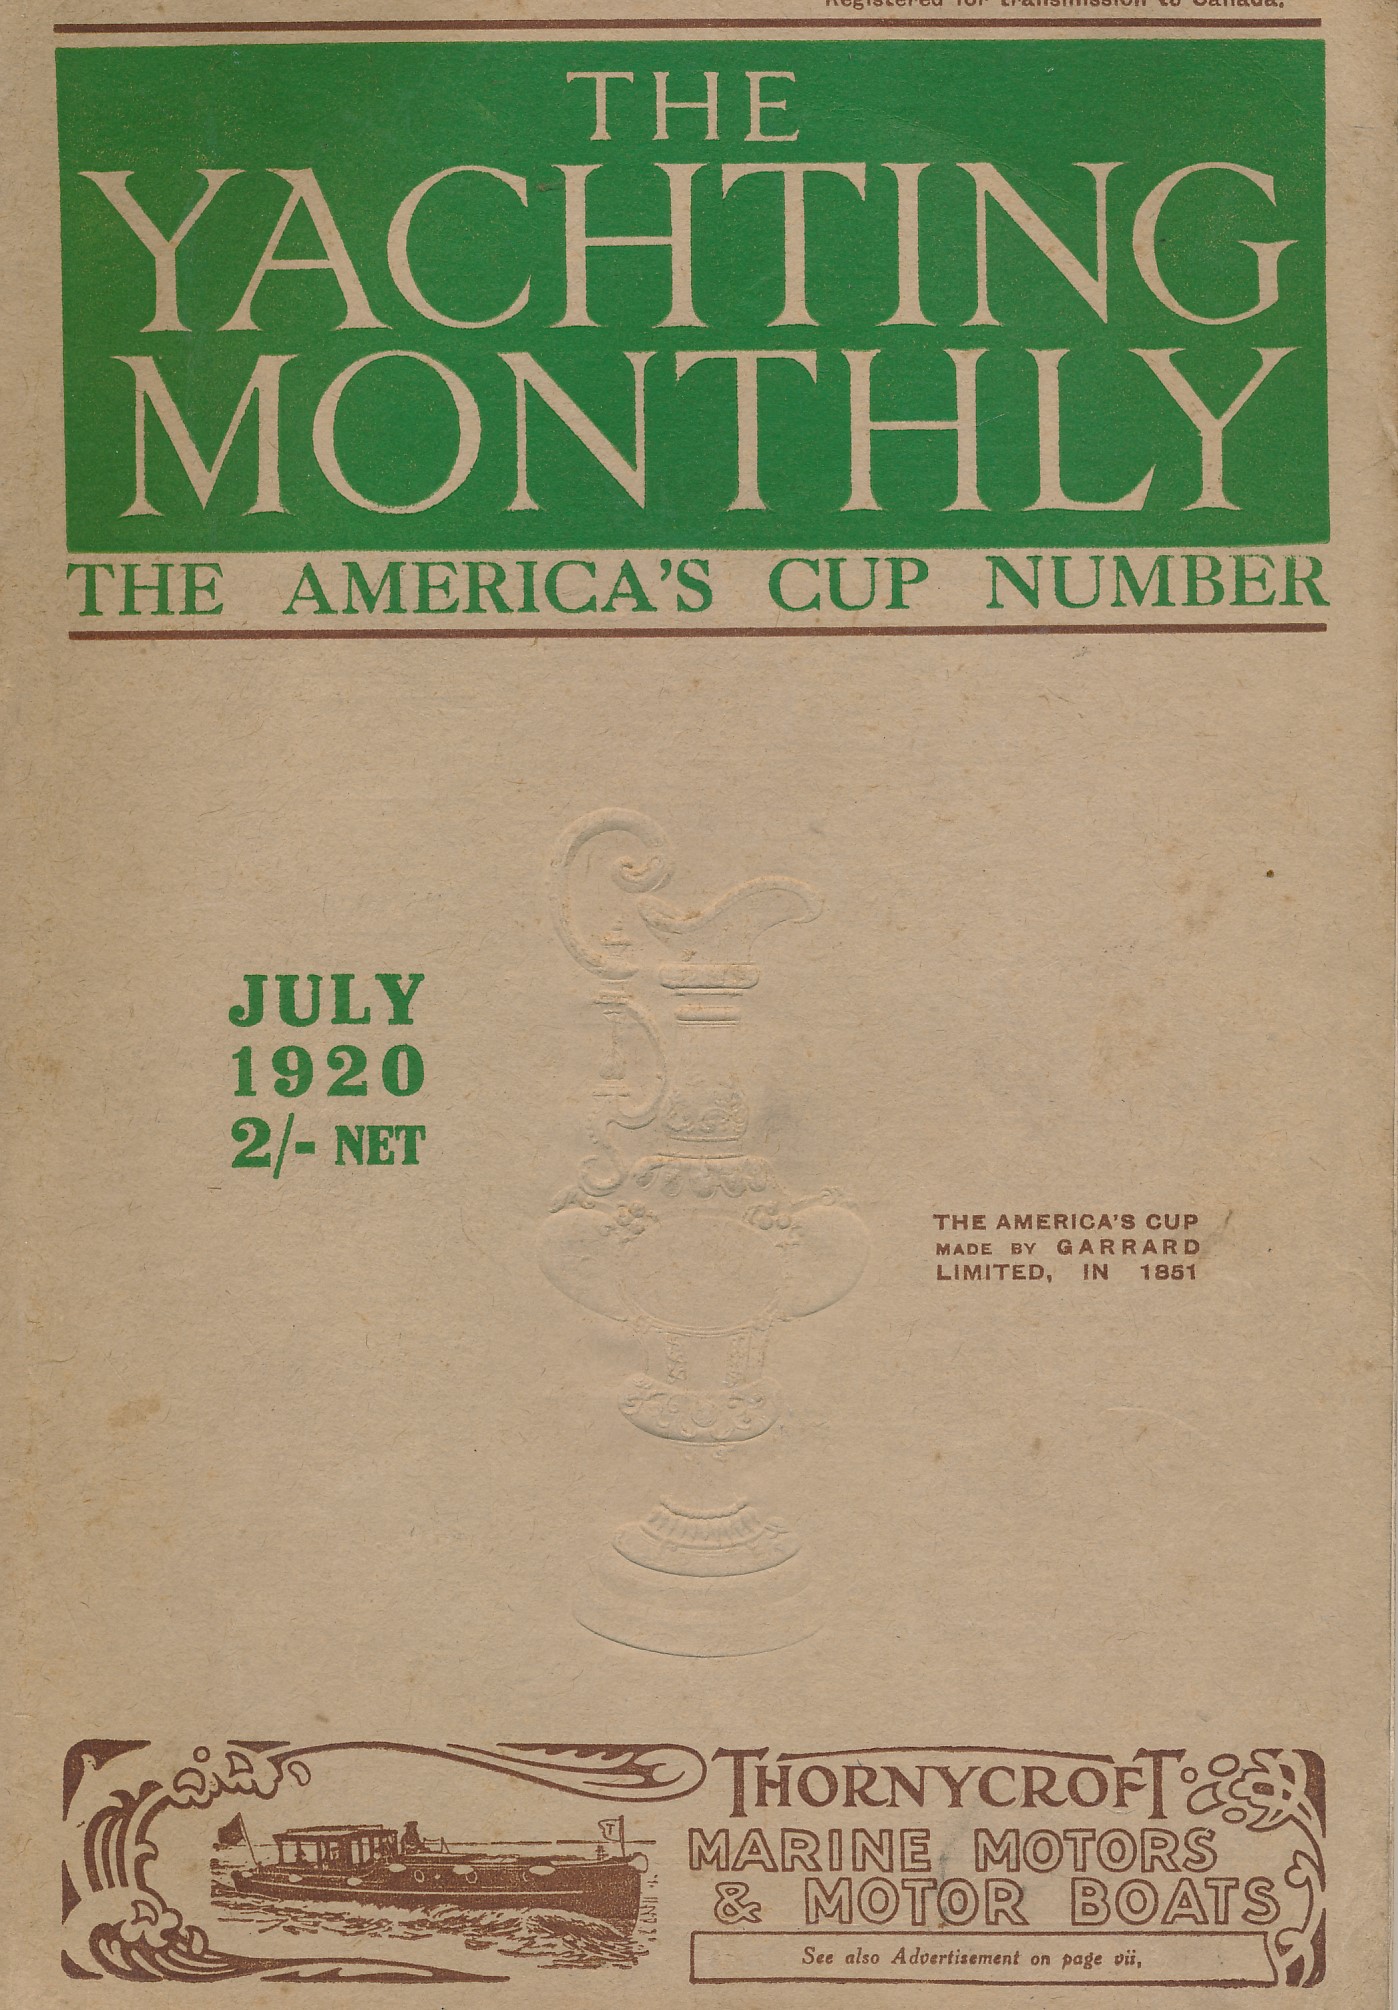 The Yachting Monthly.  Volume 171.- Vol. XXIX.  July, 1920.